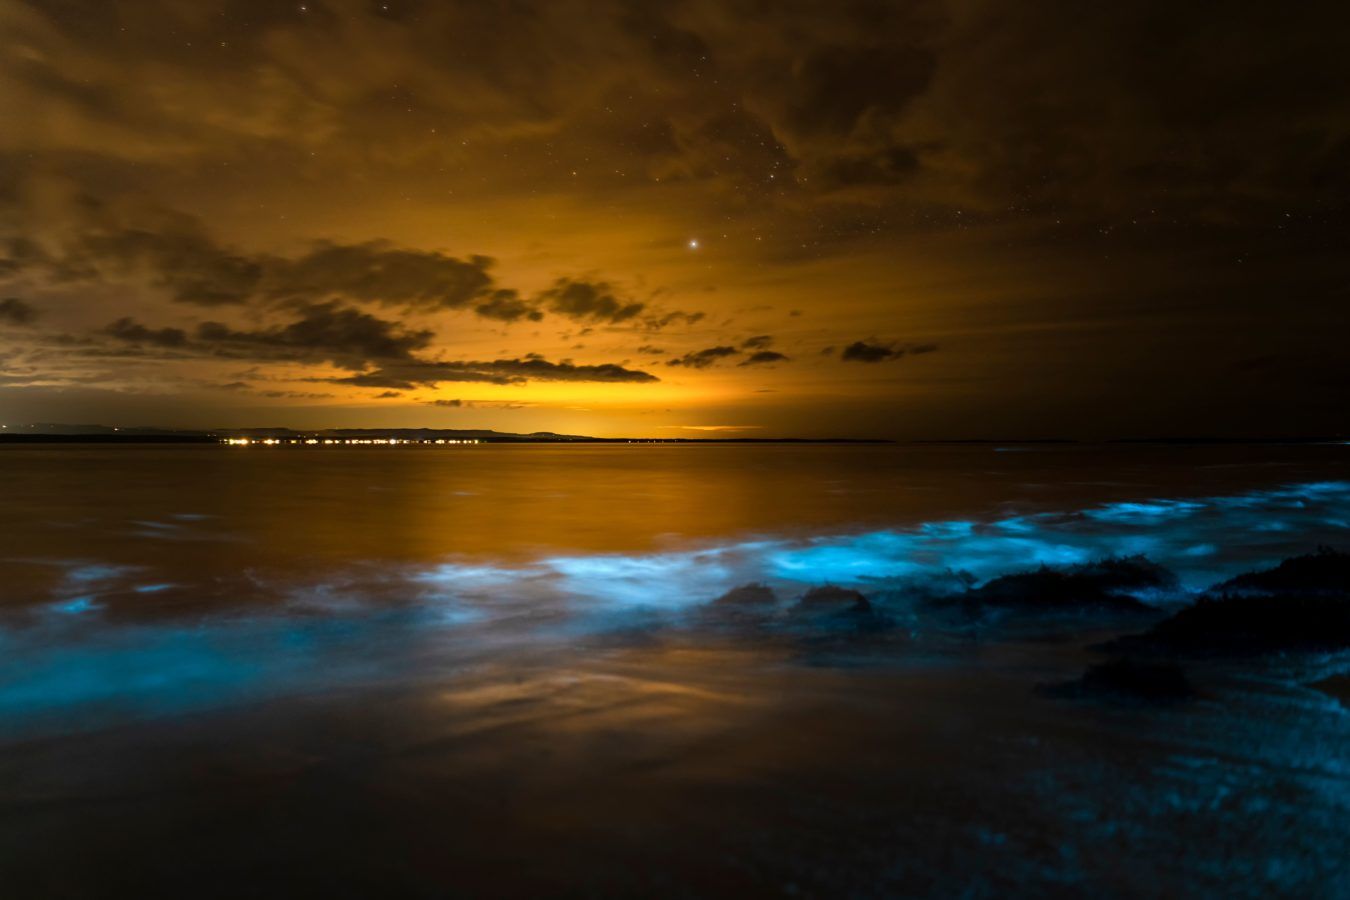 Get a glow in the dark experience at these bioluminescent beaches in India